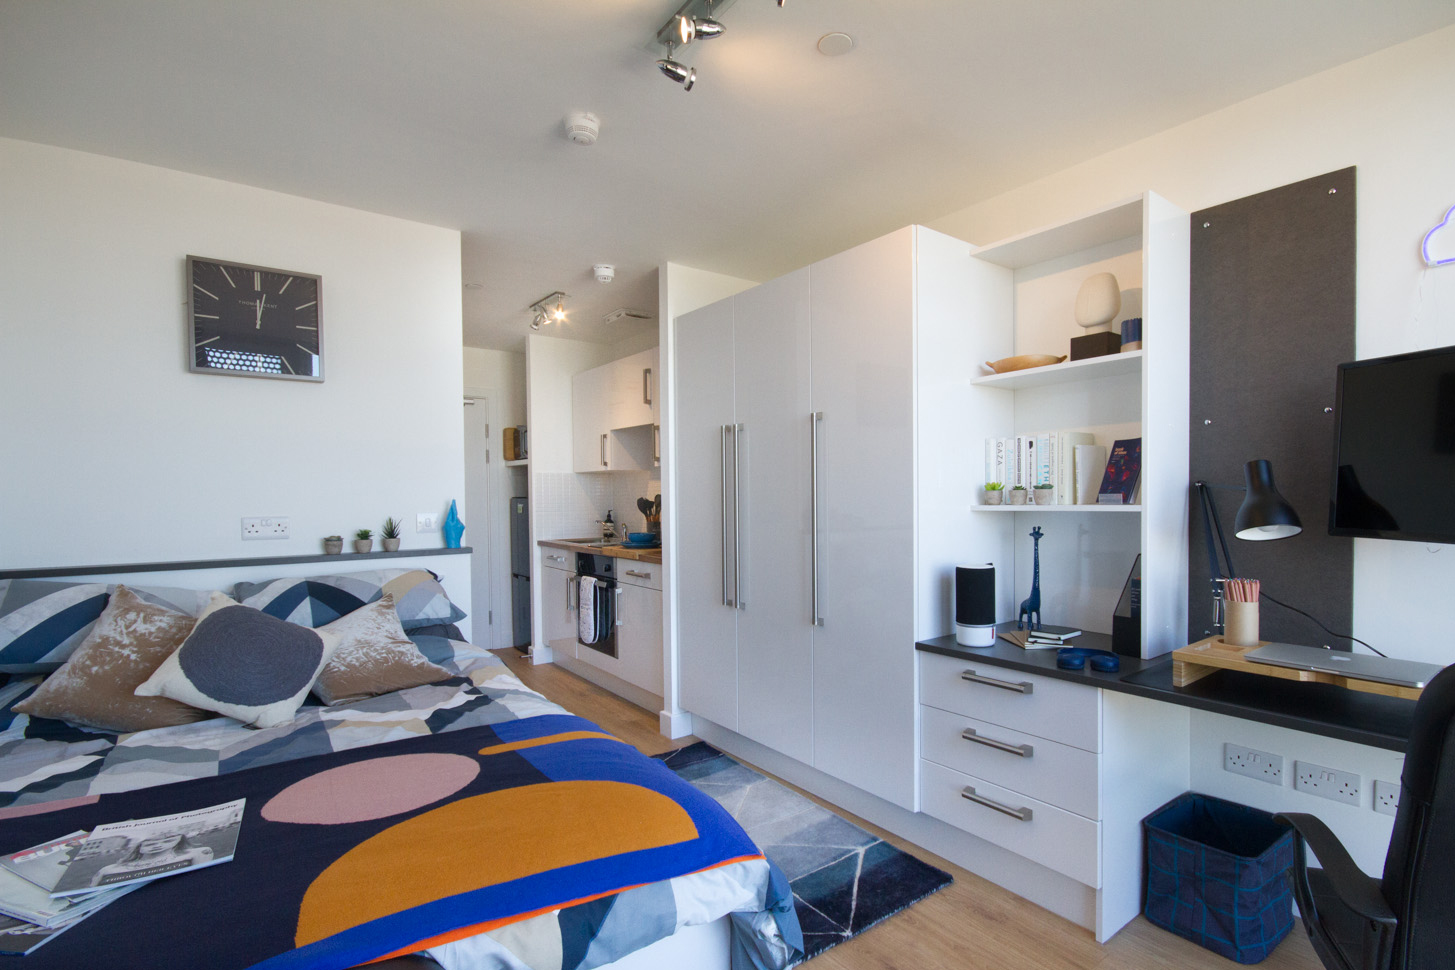 Penthouse Studio at CODE Coventry Student Accommodation